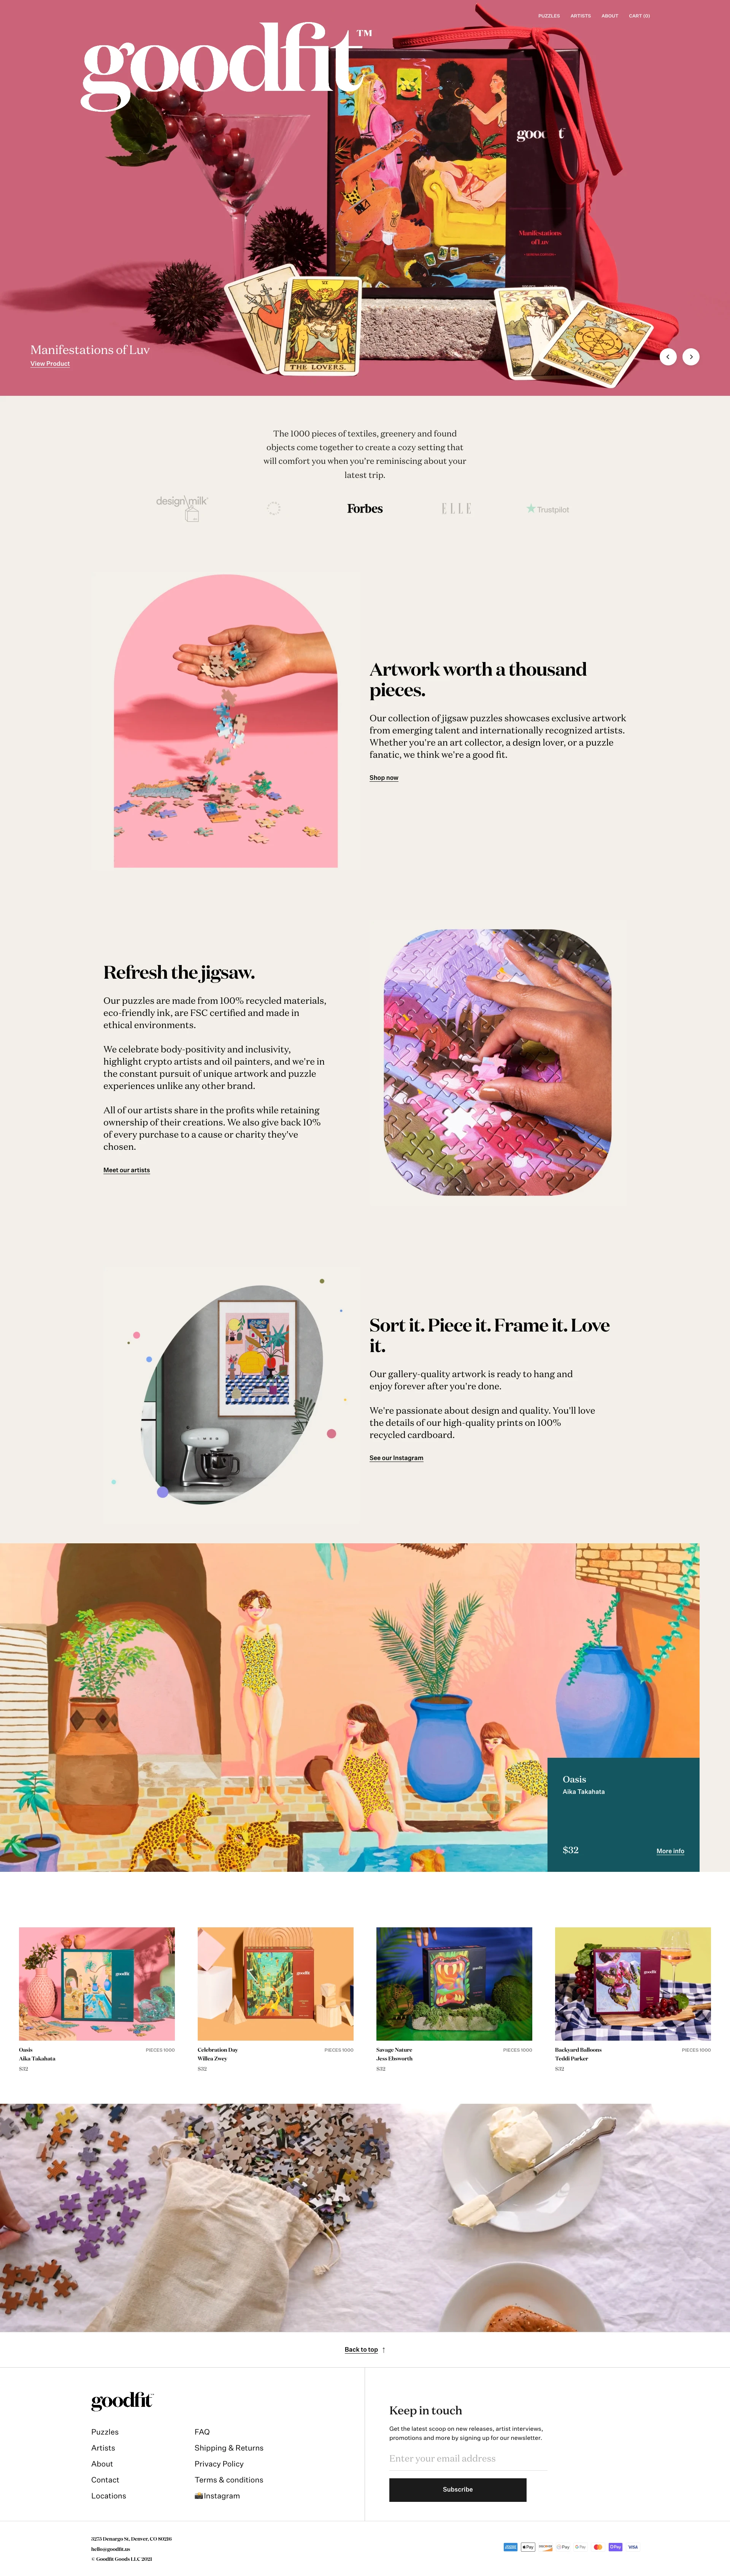 Goodfit Landing Page Example: We work with artists to create modern jigsaw puzzles that spotlight culture, friendship, and change. We give back 10% of every purchase to a cause selected by the artist.